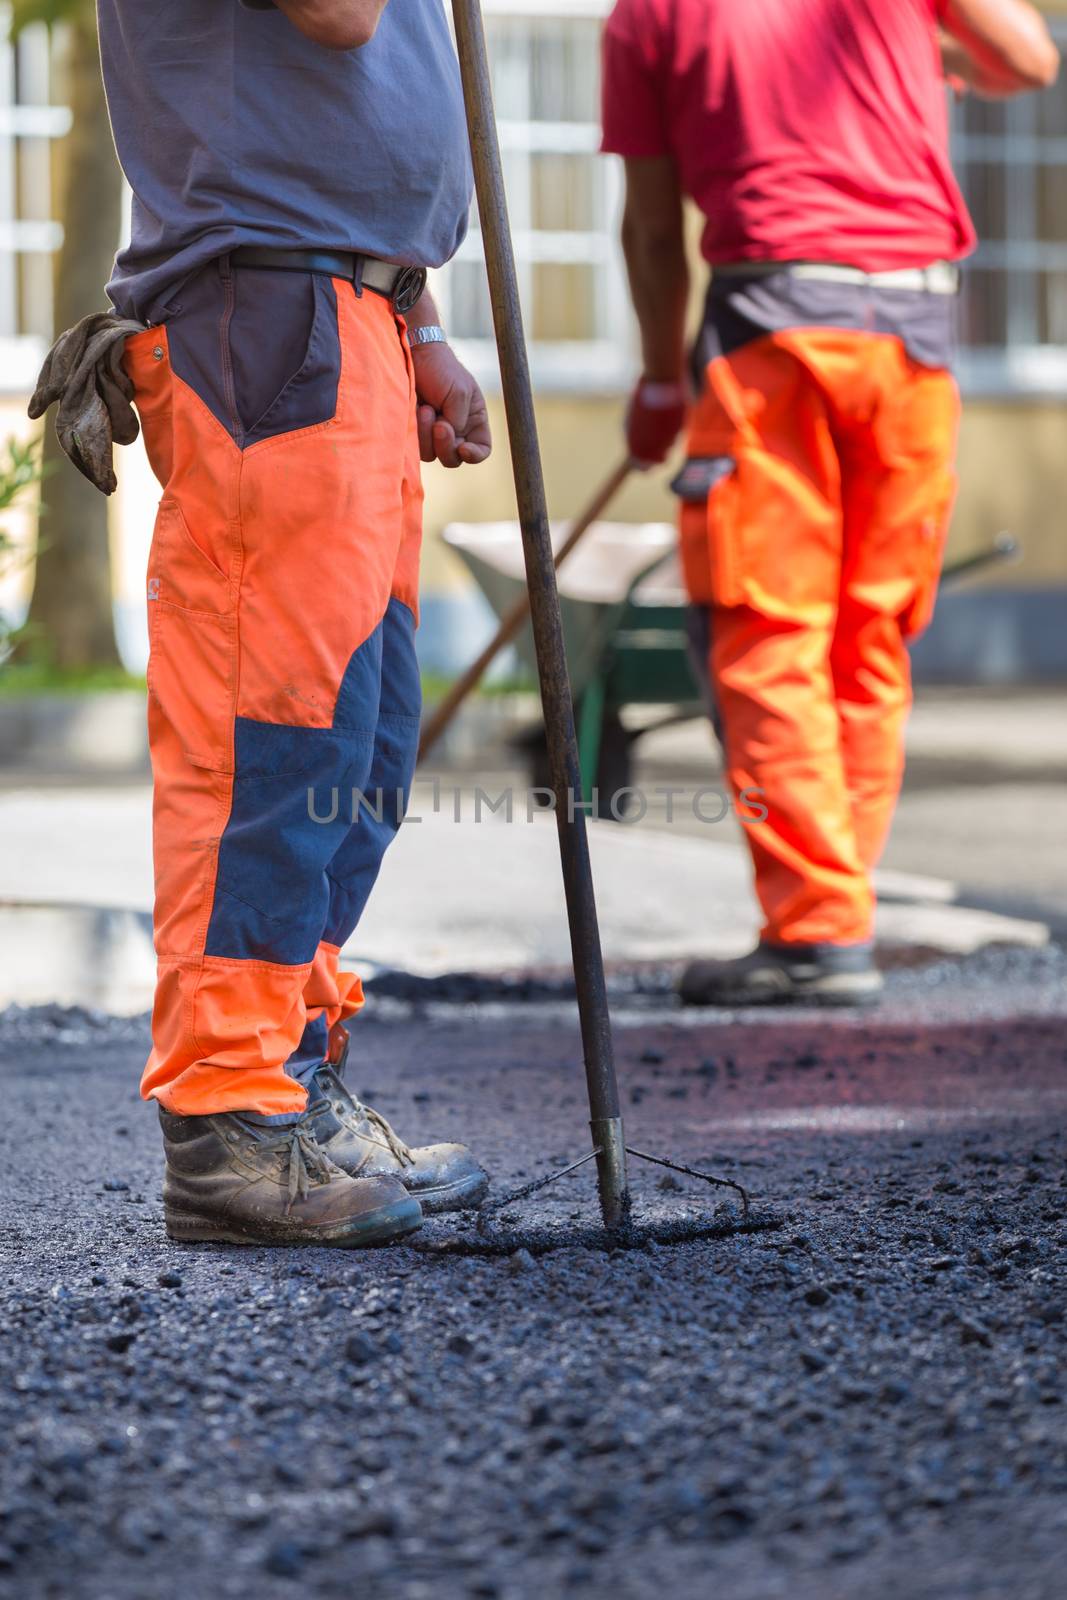 Construction workers during asphalting road works wearing coveralls. Manual labor on construction site.